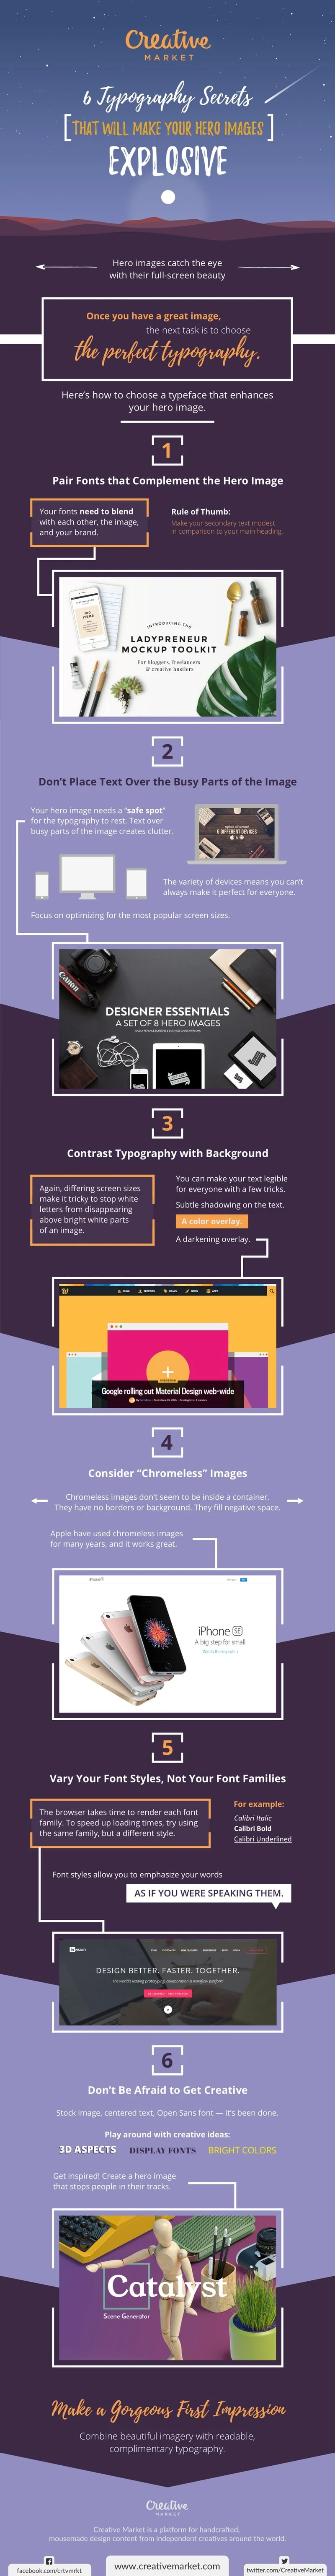 6 Typography Secrets That Will Make Your Hero Images Explosive - #infographic